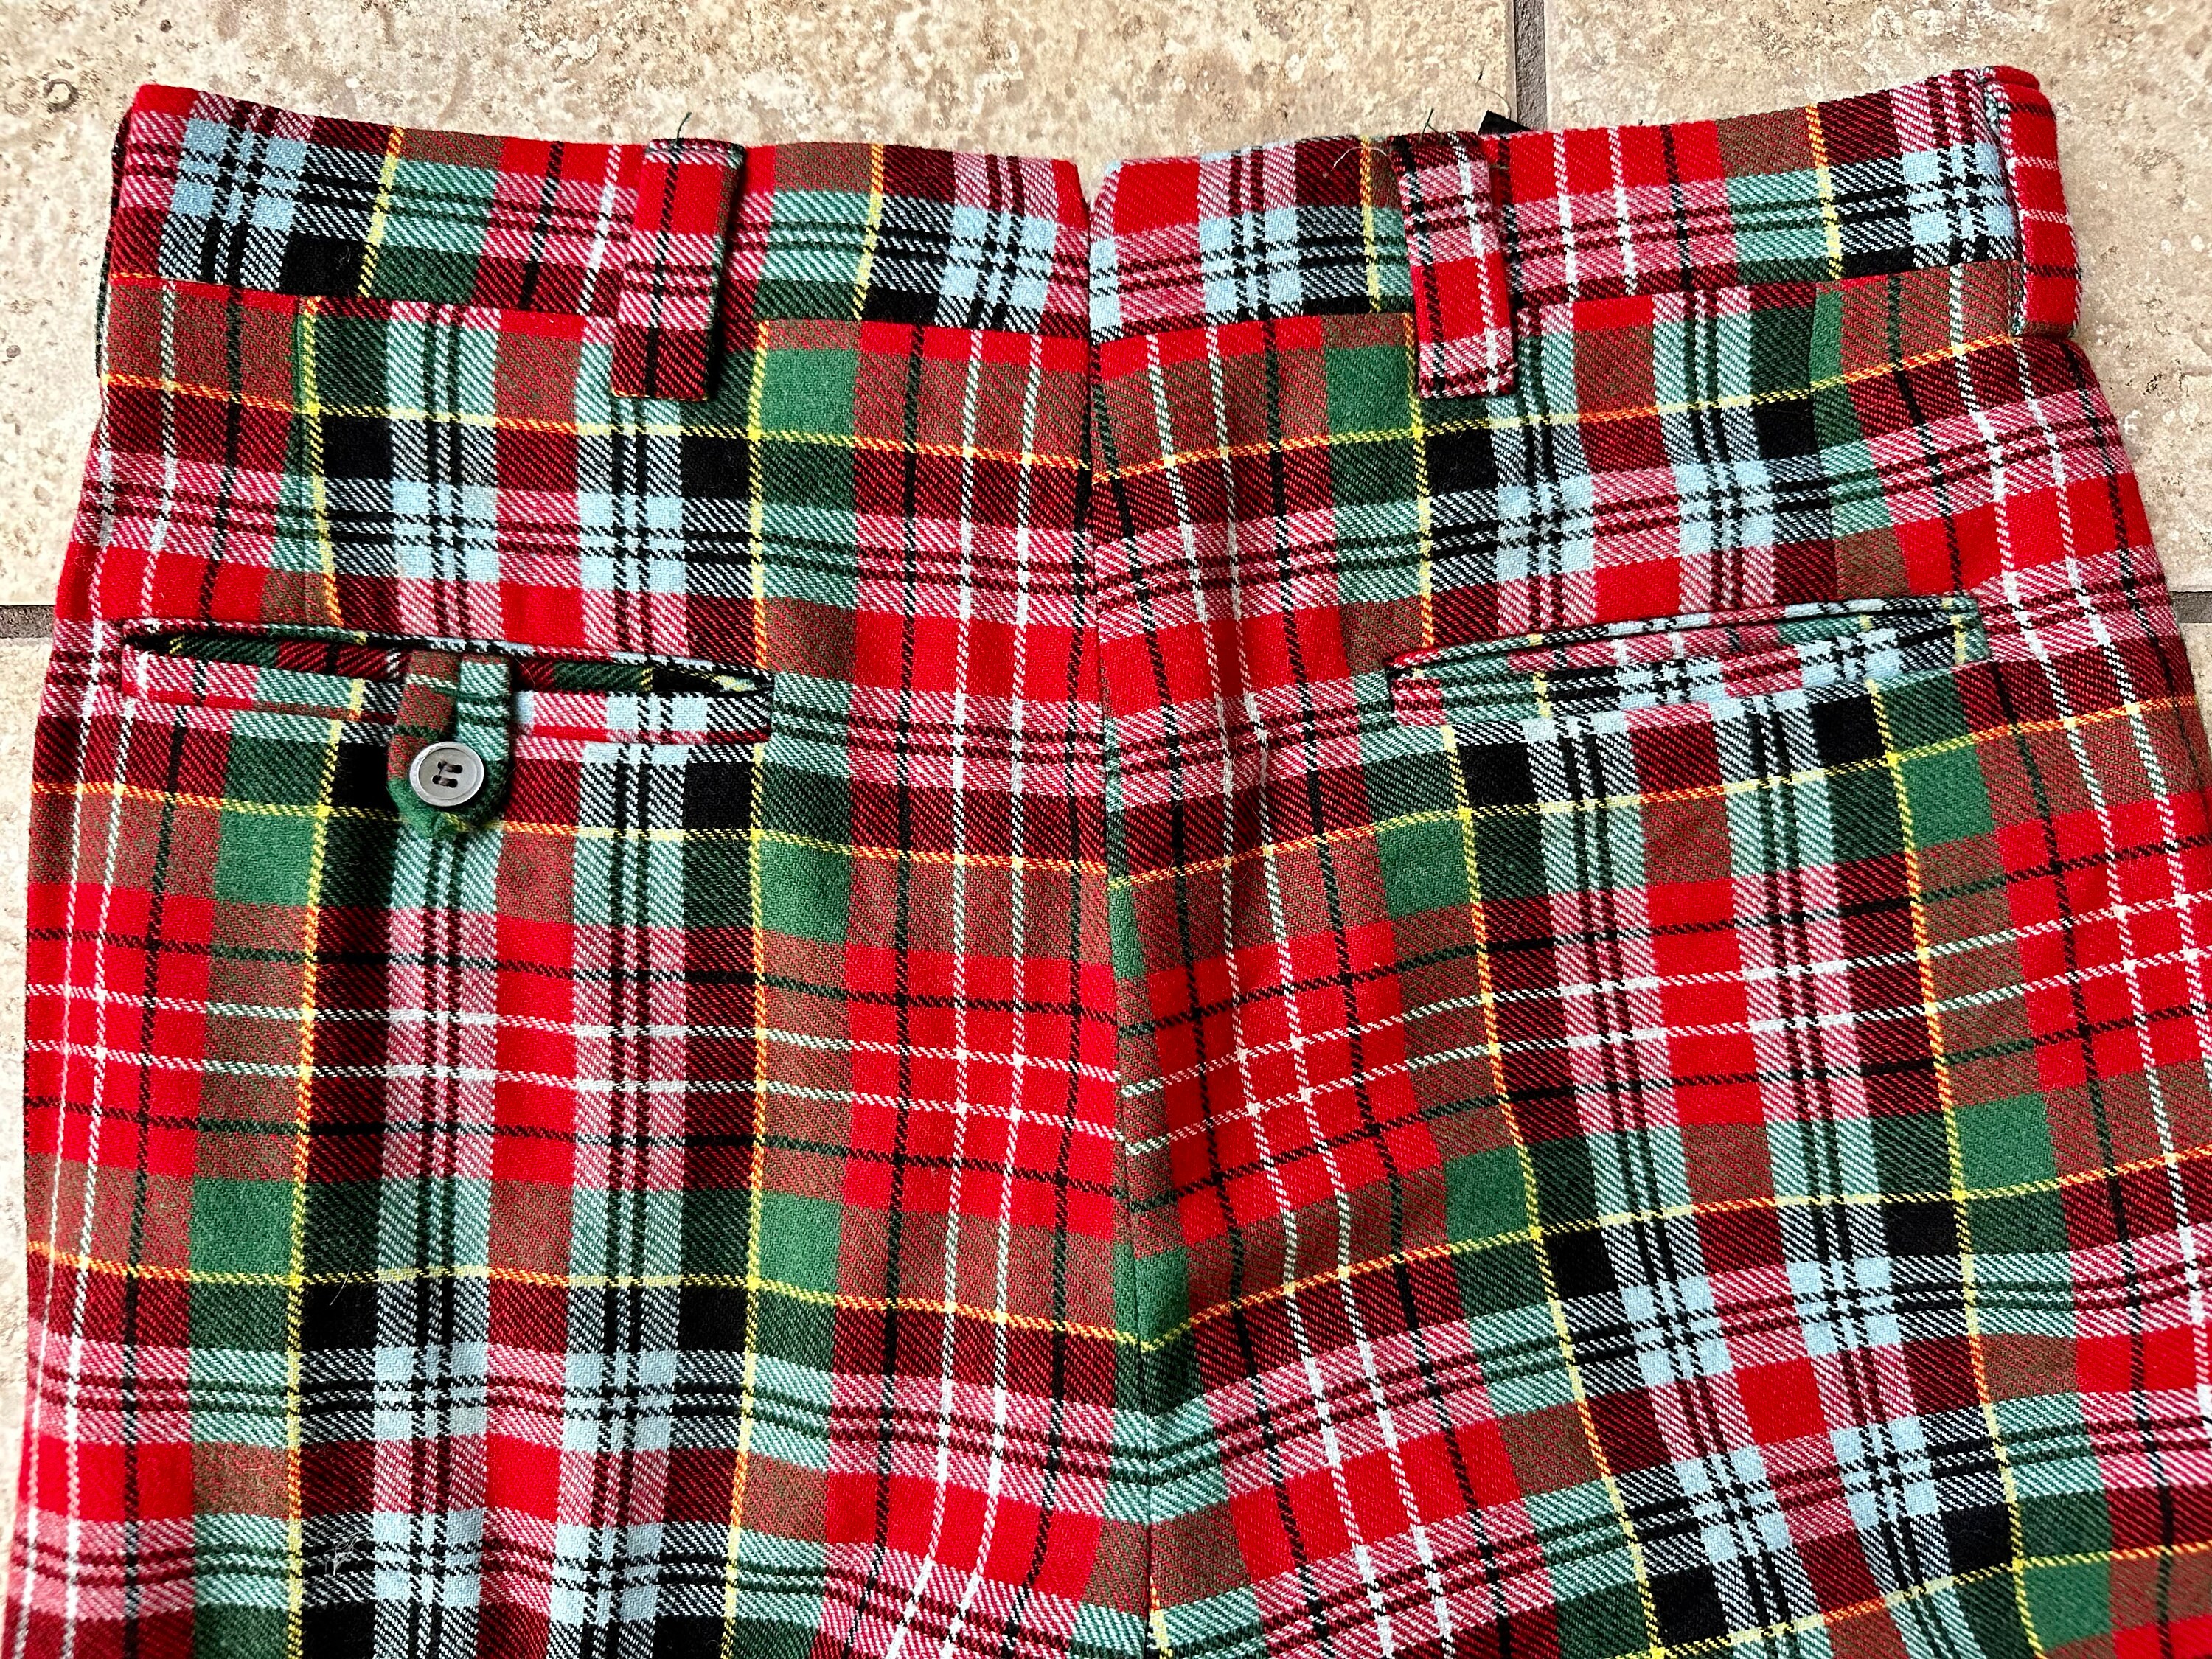 Vintage O'CONNELL'S Red Tartan Plaid Lambswool Trousers 32 X 30.75 Ivy  League Trad -  Israel